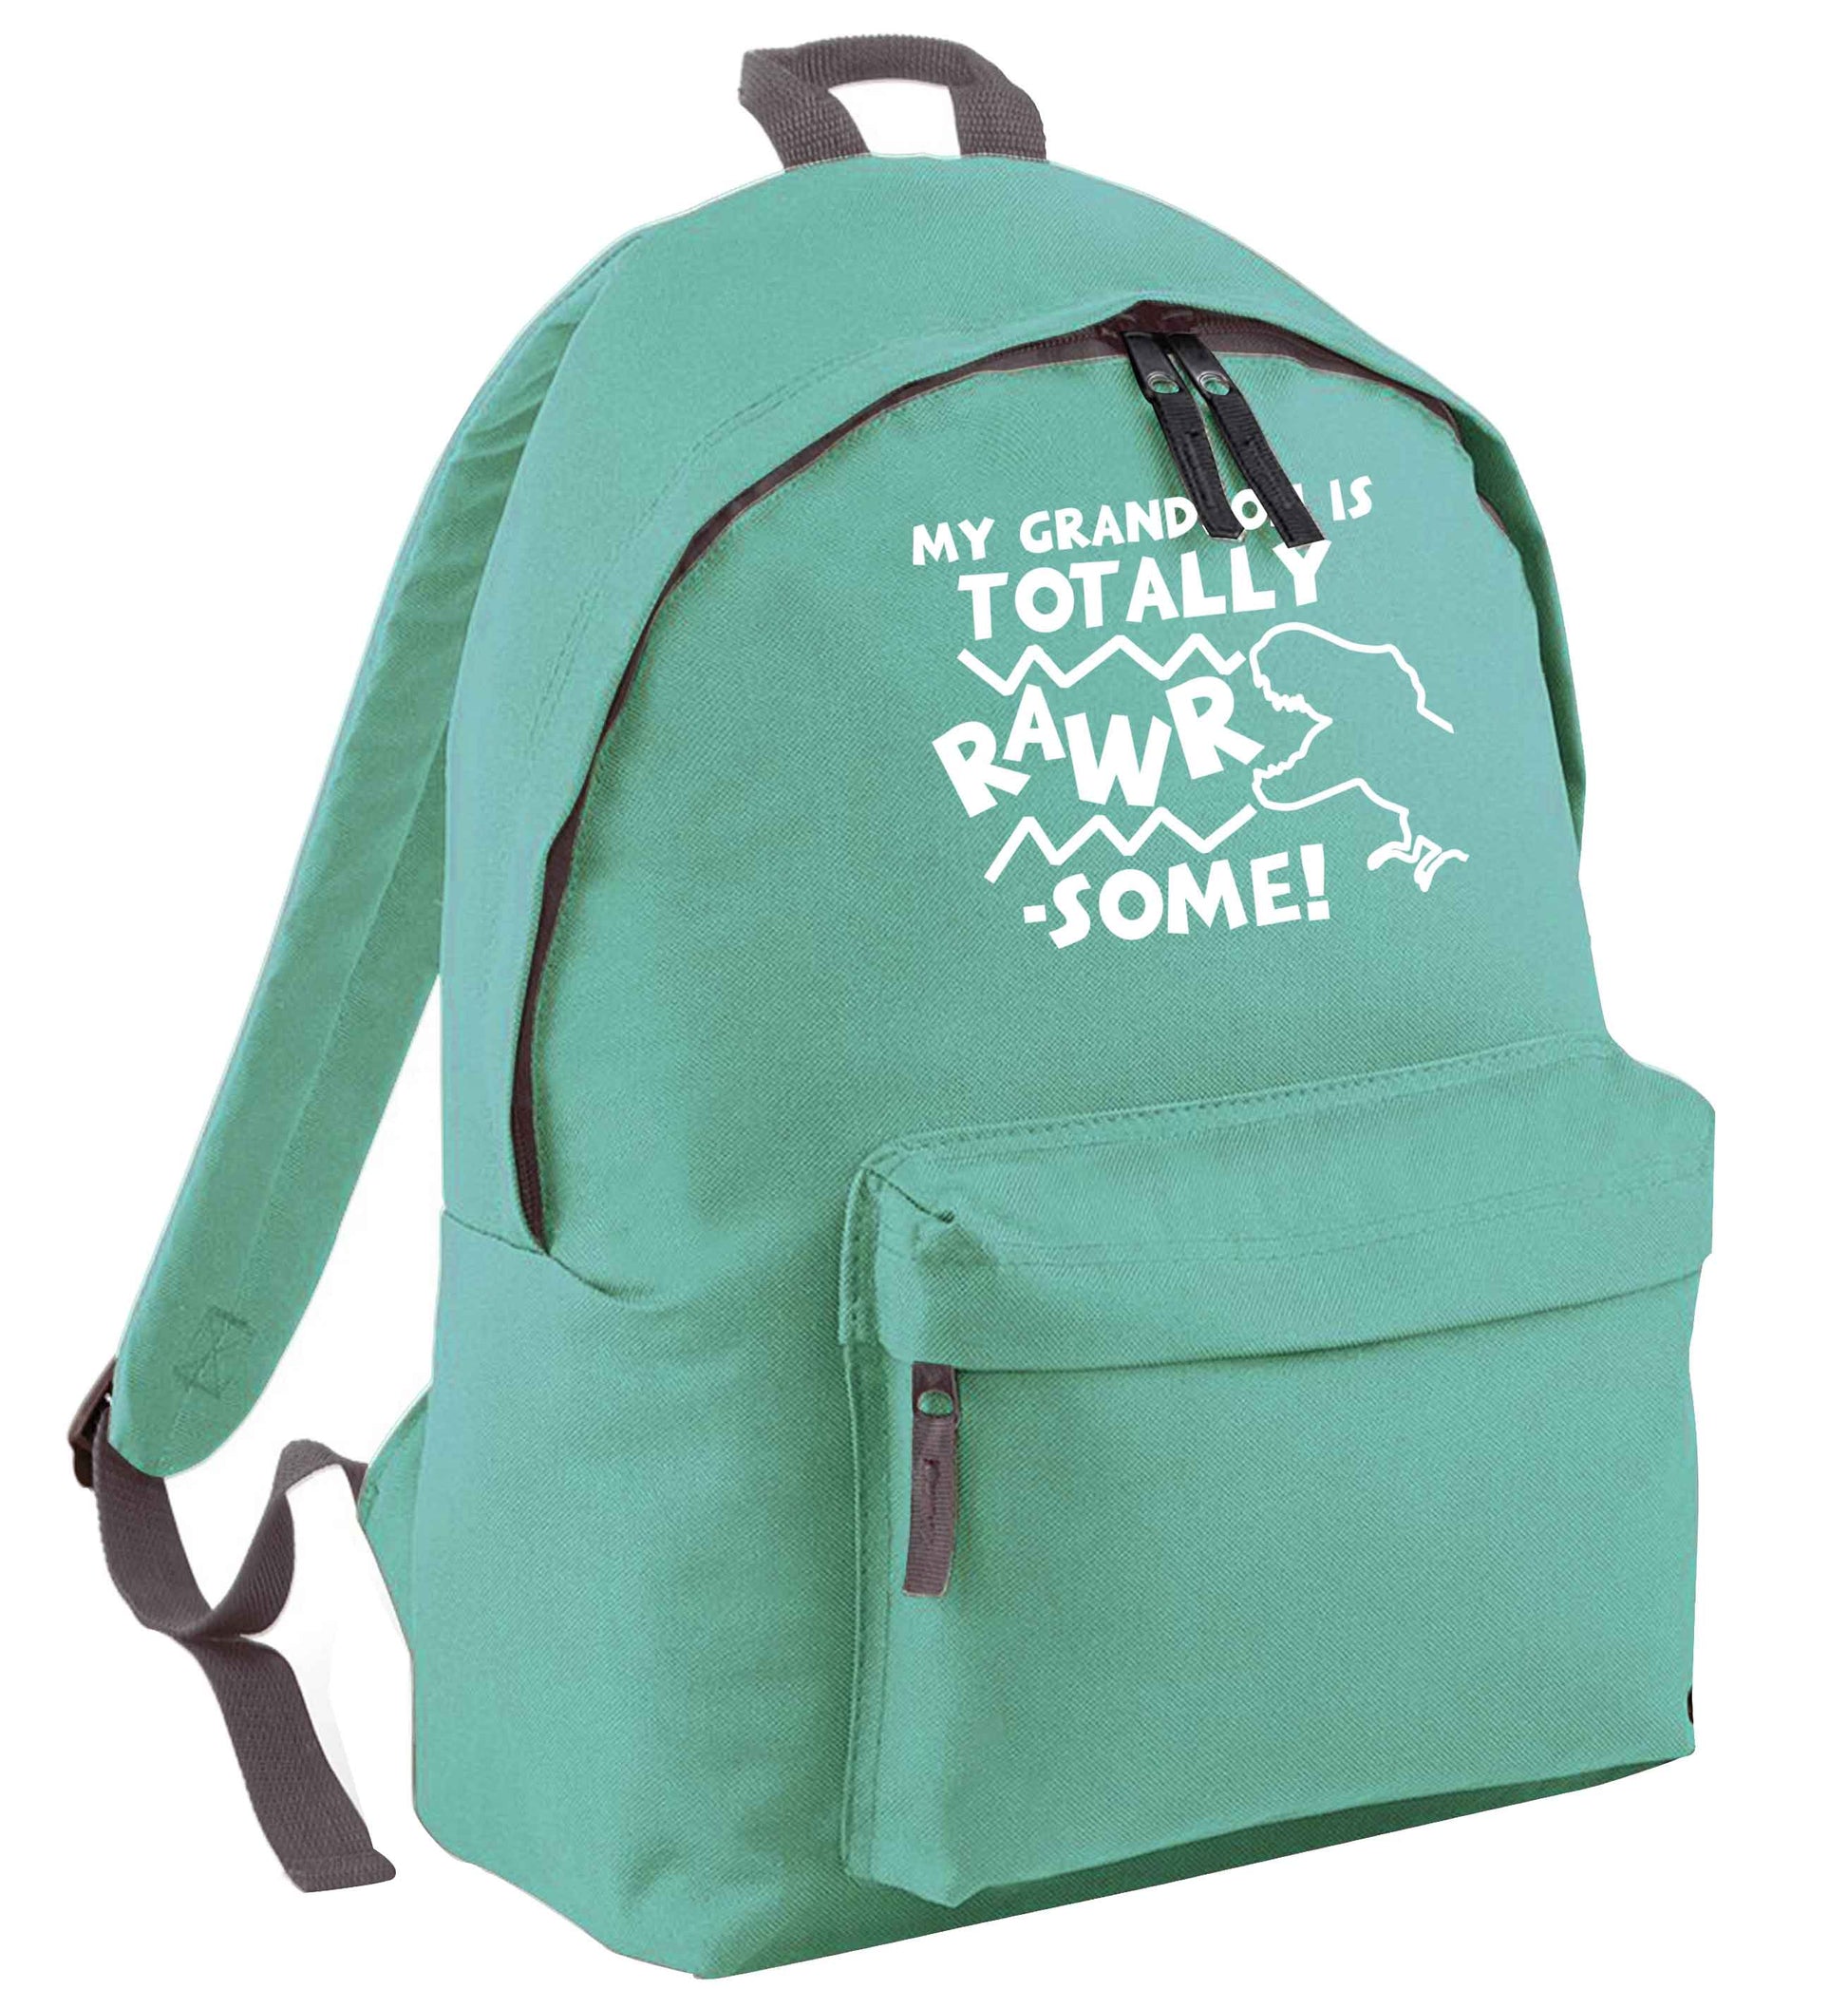 My grandson is totally rawrsome mint adults backpack